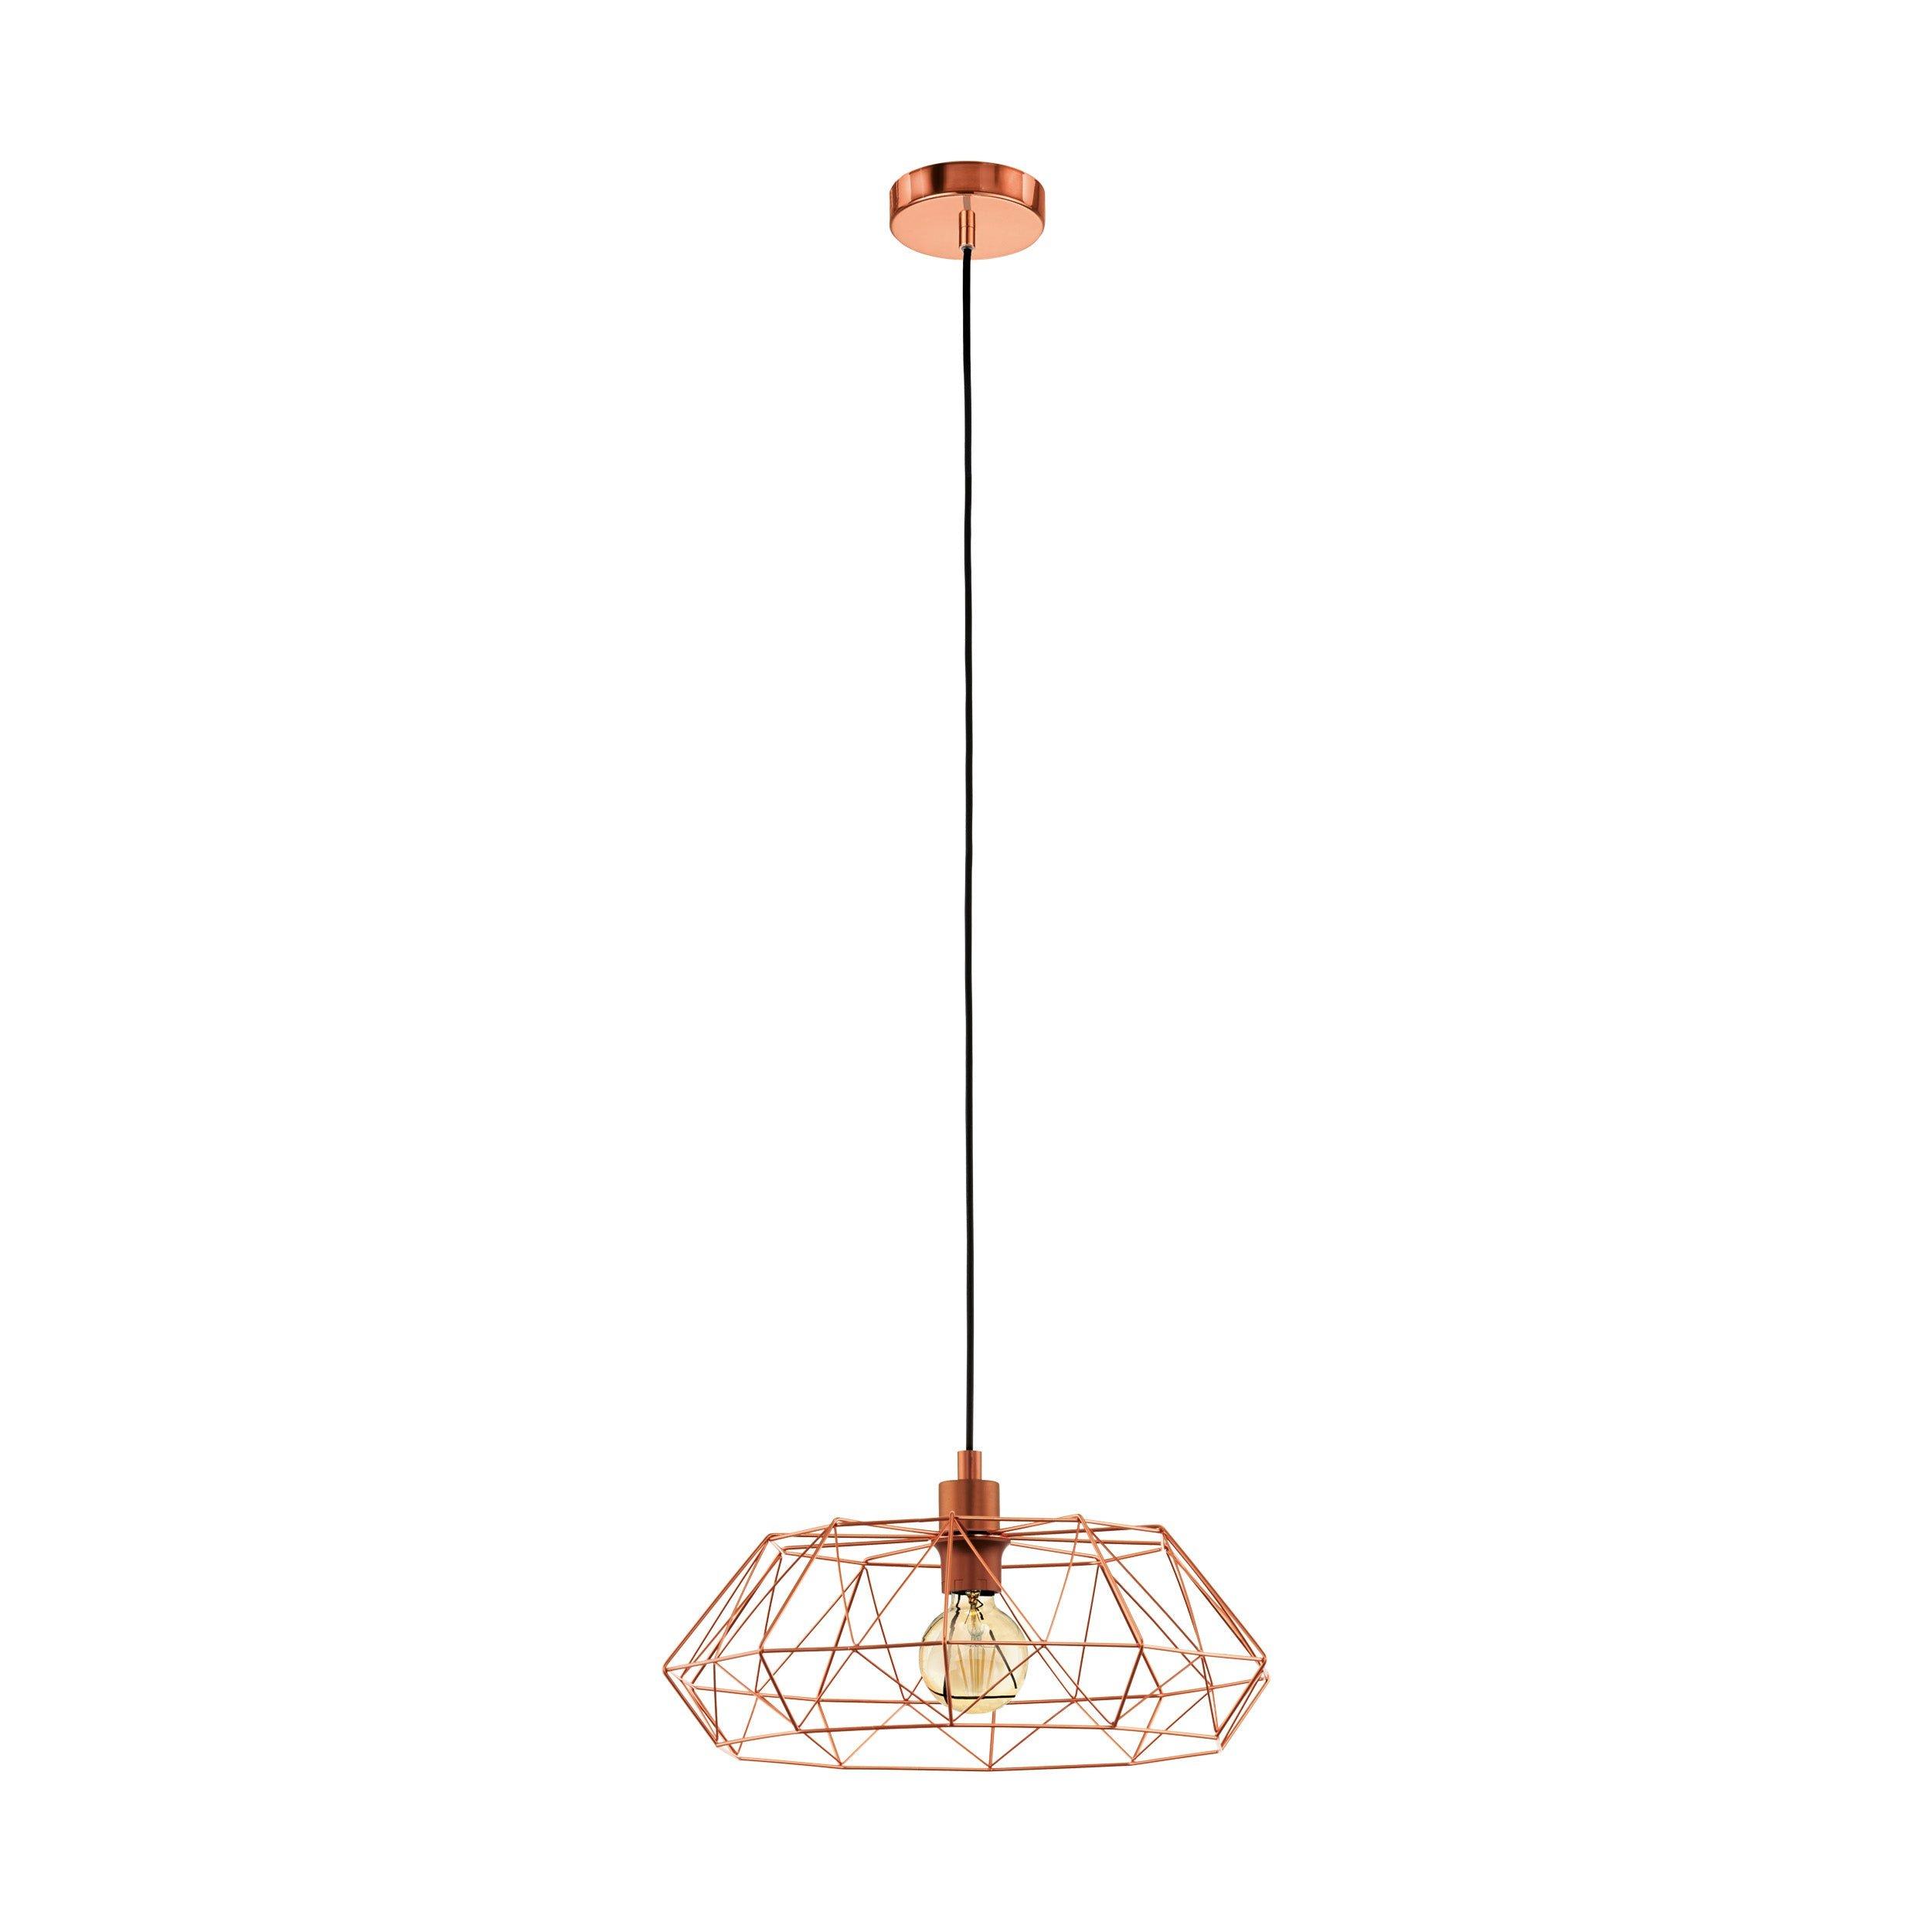 Hanging Ceiling Pendant Light Copper Cage Shade 60W E27 Hallway Feature Lamp